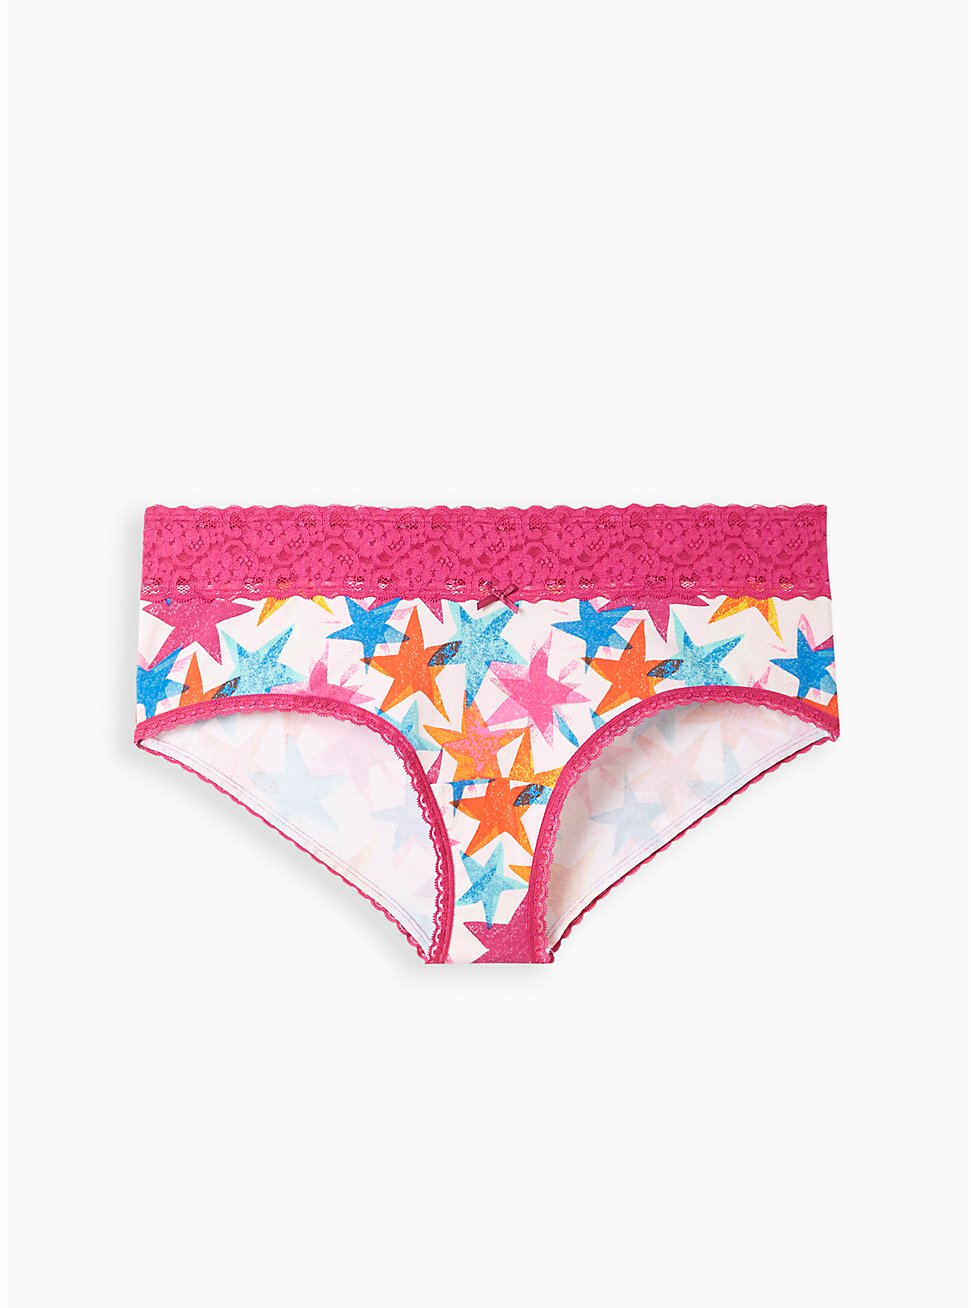 Cotton Mid-Rise Cheeky Lace Trim Panty, PINK FLOW STAR, hi-res